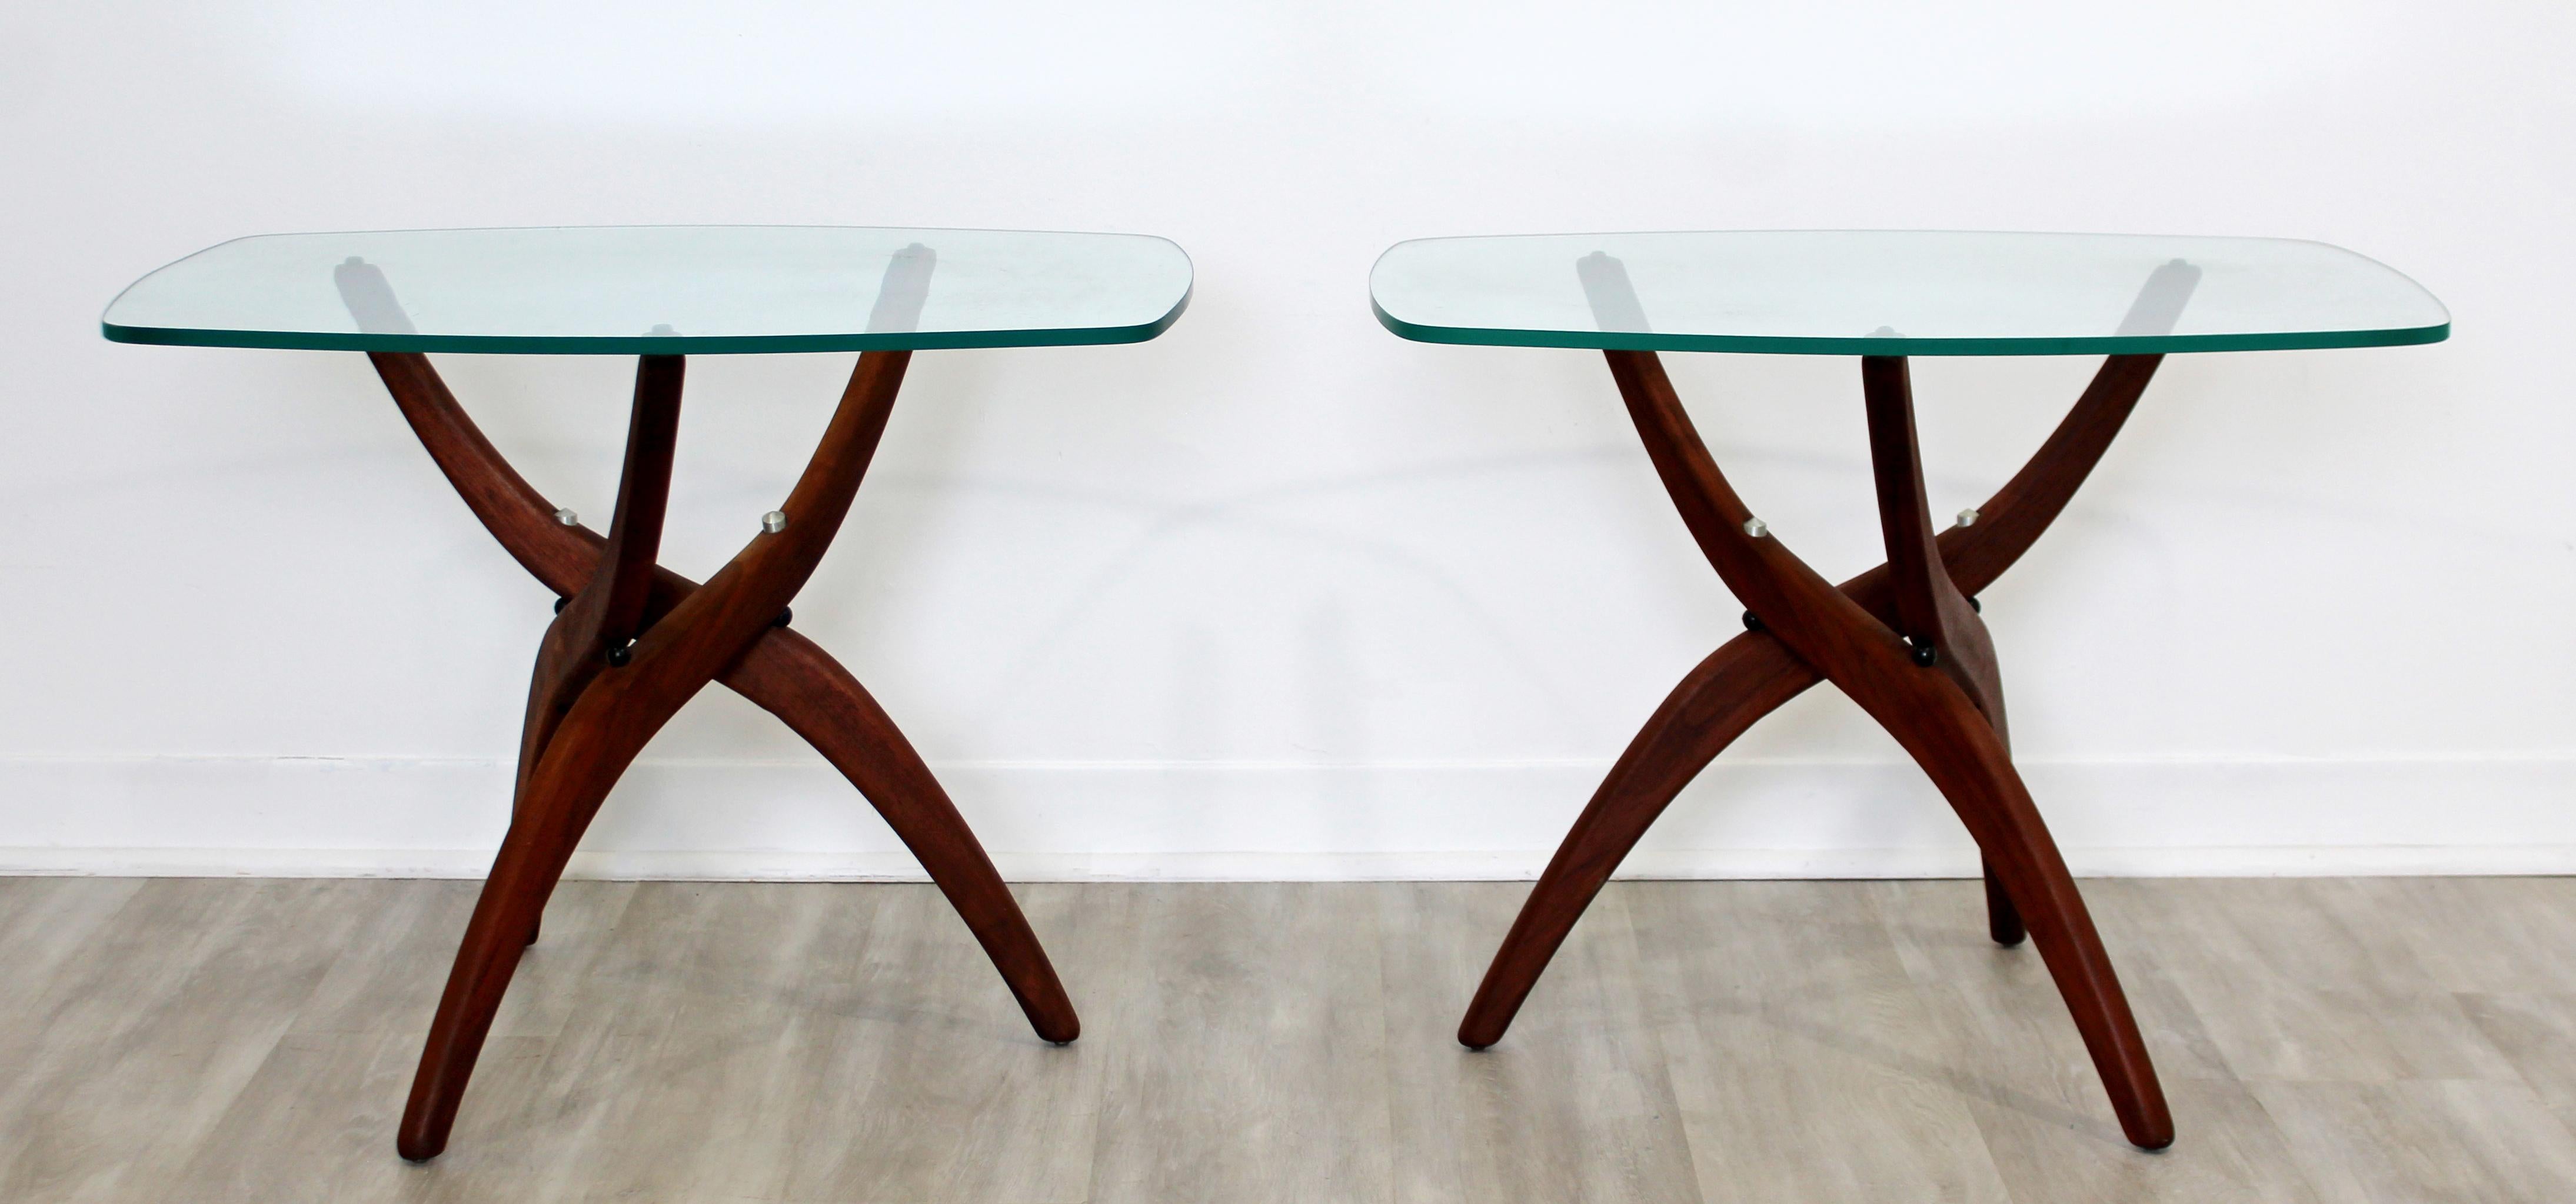 For your consideration is a marvelous pair of walnut and glass side or end tables, by Forest Wilson, circa 1960s. In excellent vintage condition, with a minor chip in one of the tops. The dimensions of each are 27